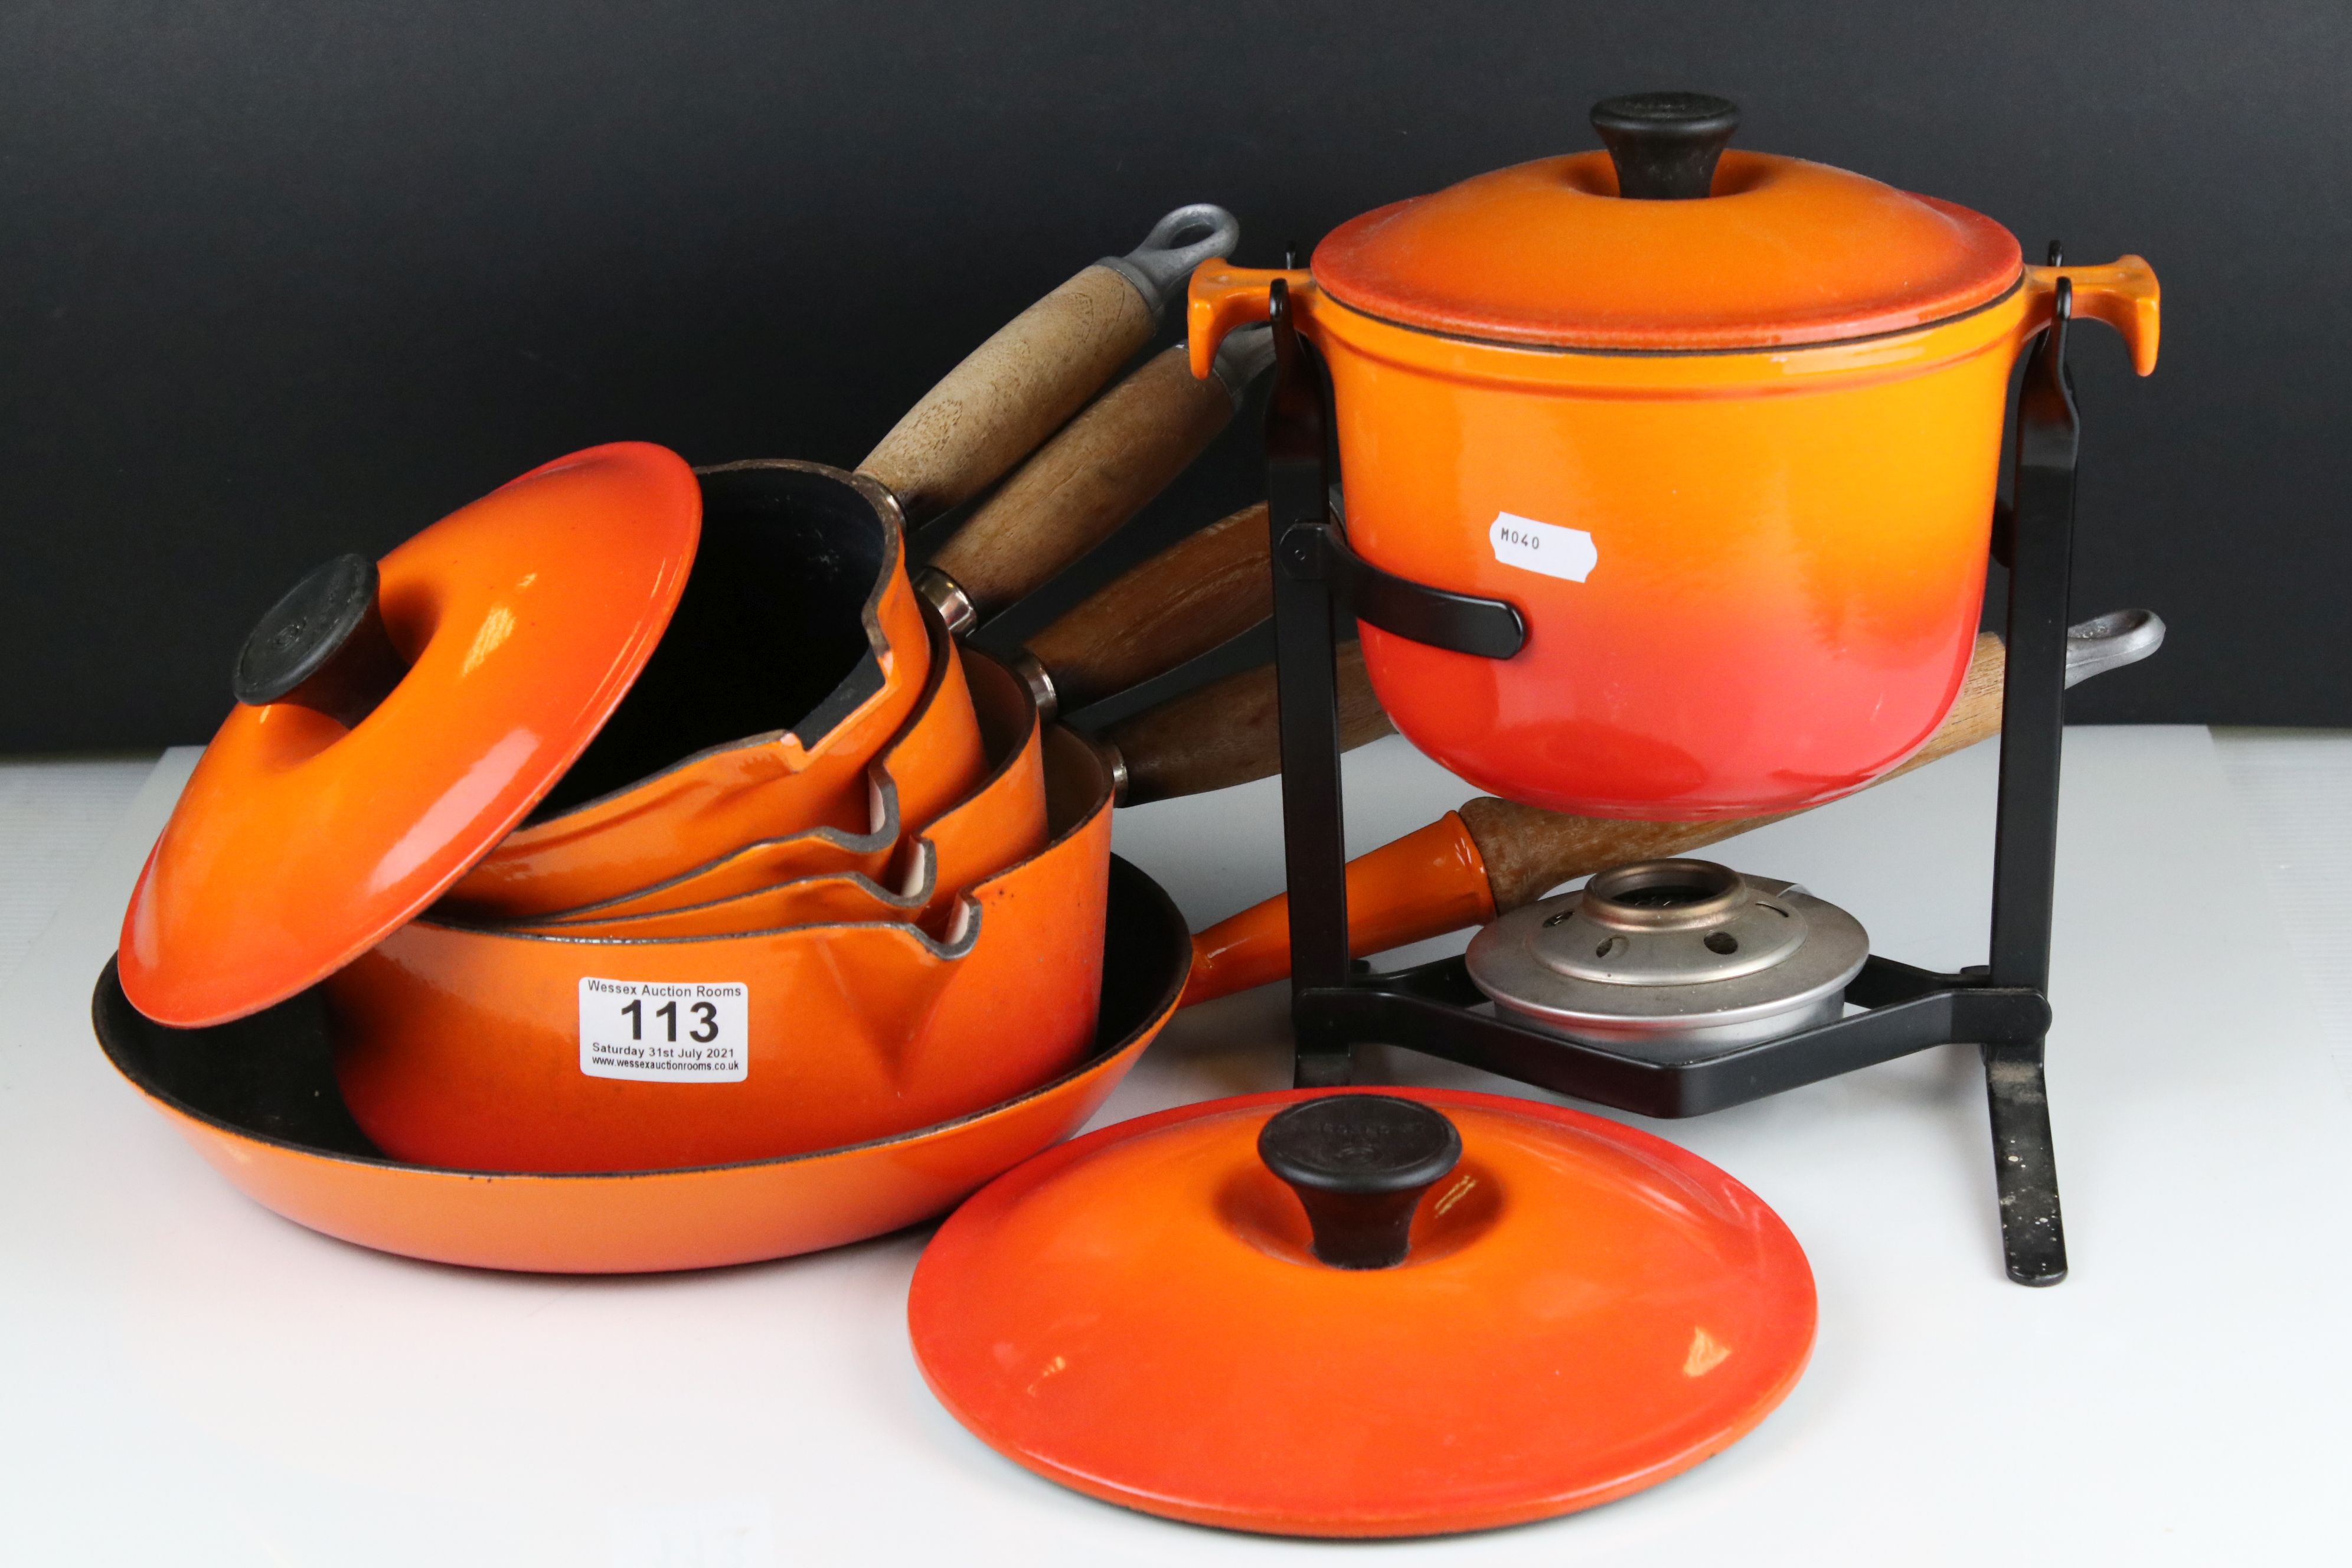 A collection of Le Creuset cast iron red pots and pans together with a fondue pan and burner.